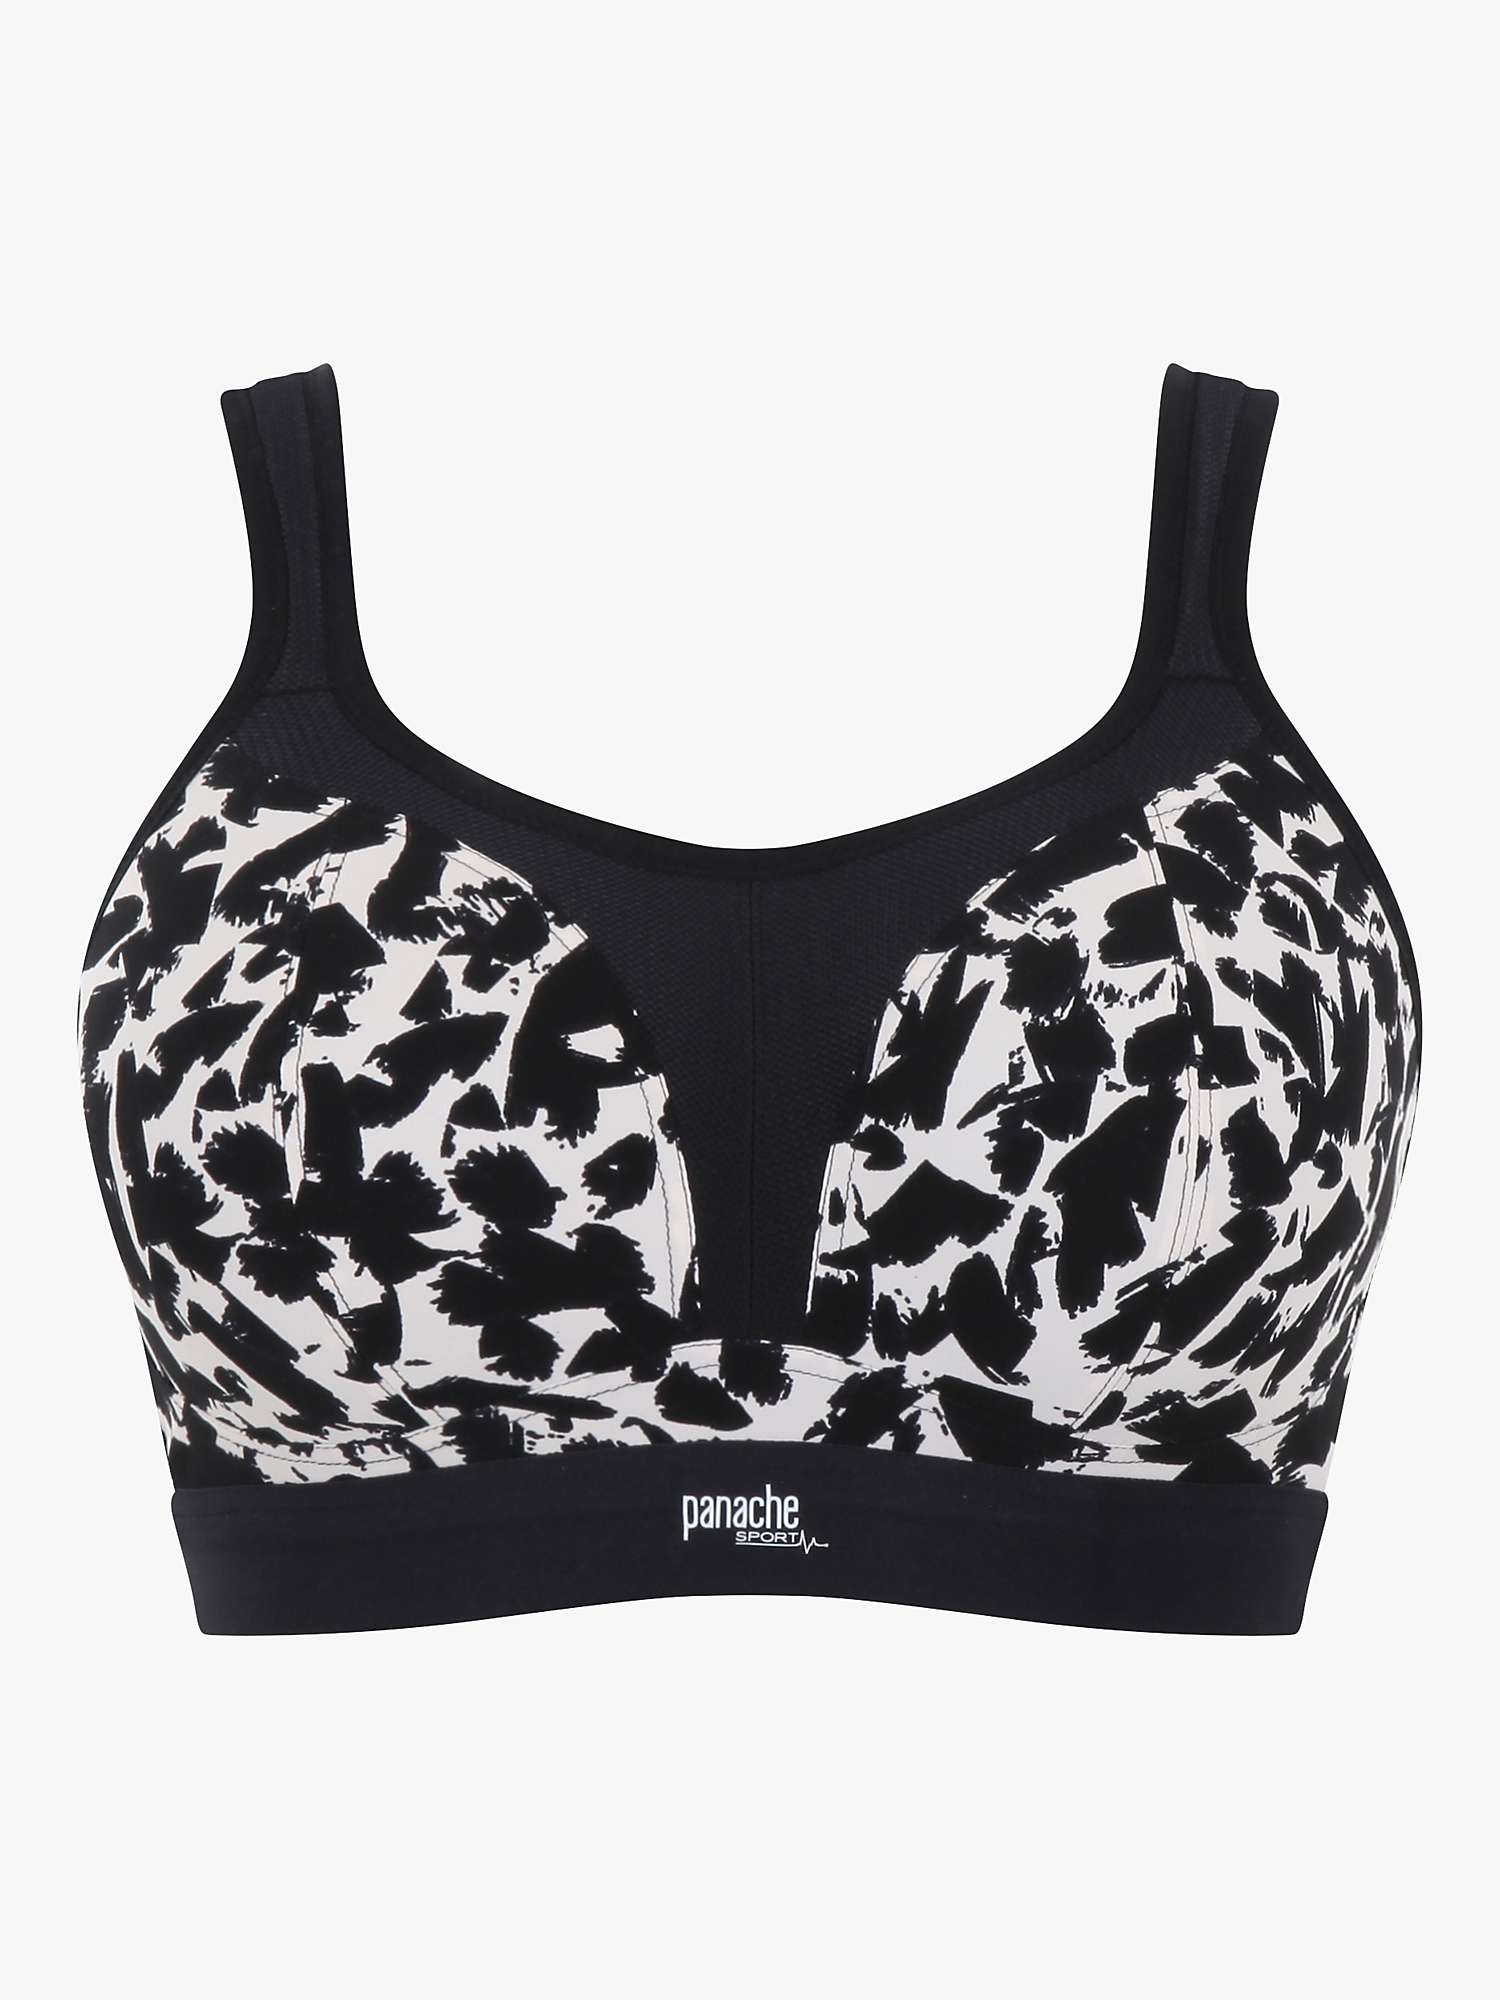 Buy Panache Abstract Print Non Wired Sports Bra, Black/White Online at johnlewis.com